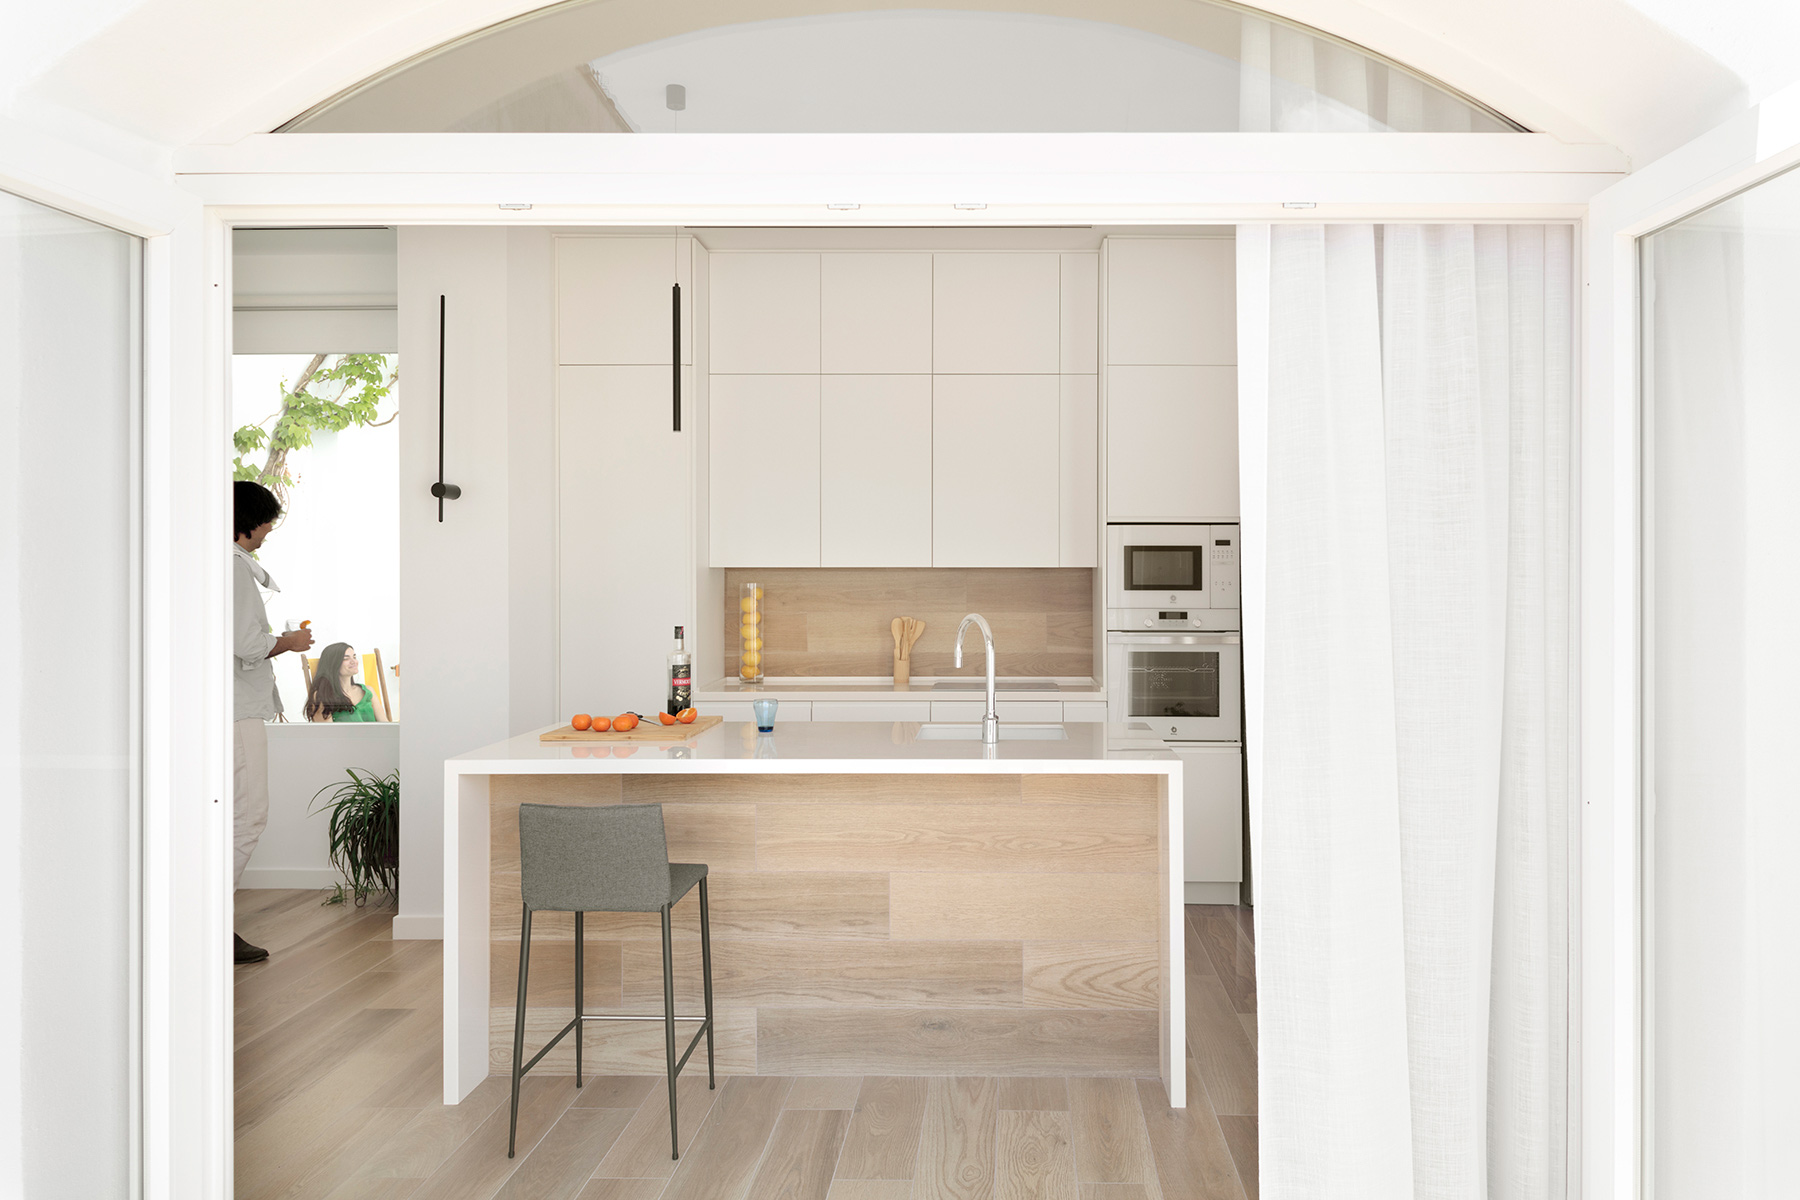 Image of Entrepatios 5 in A Mediterranean style kitchen with an eye for space - Cosentino